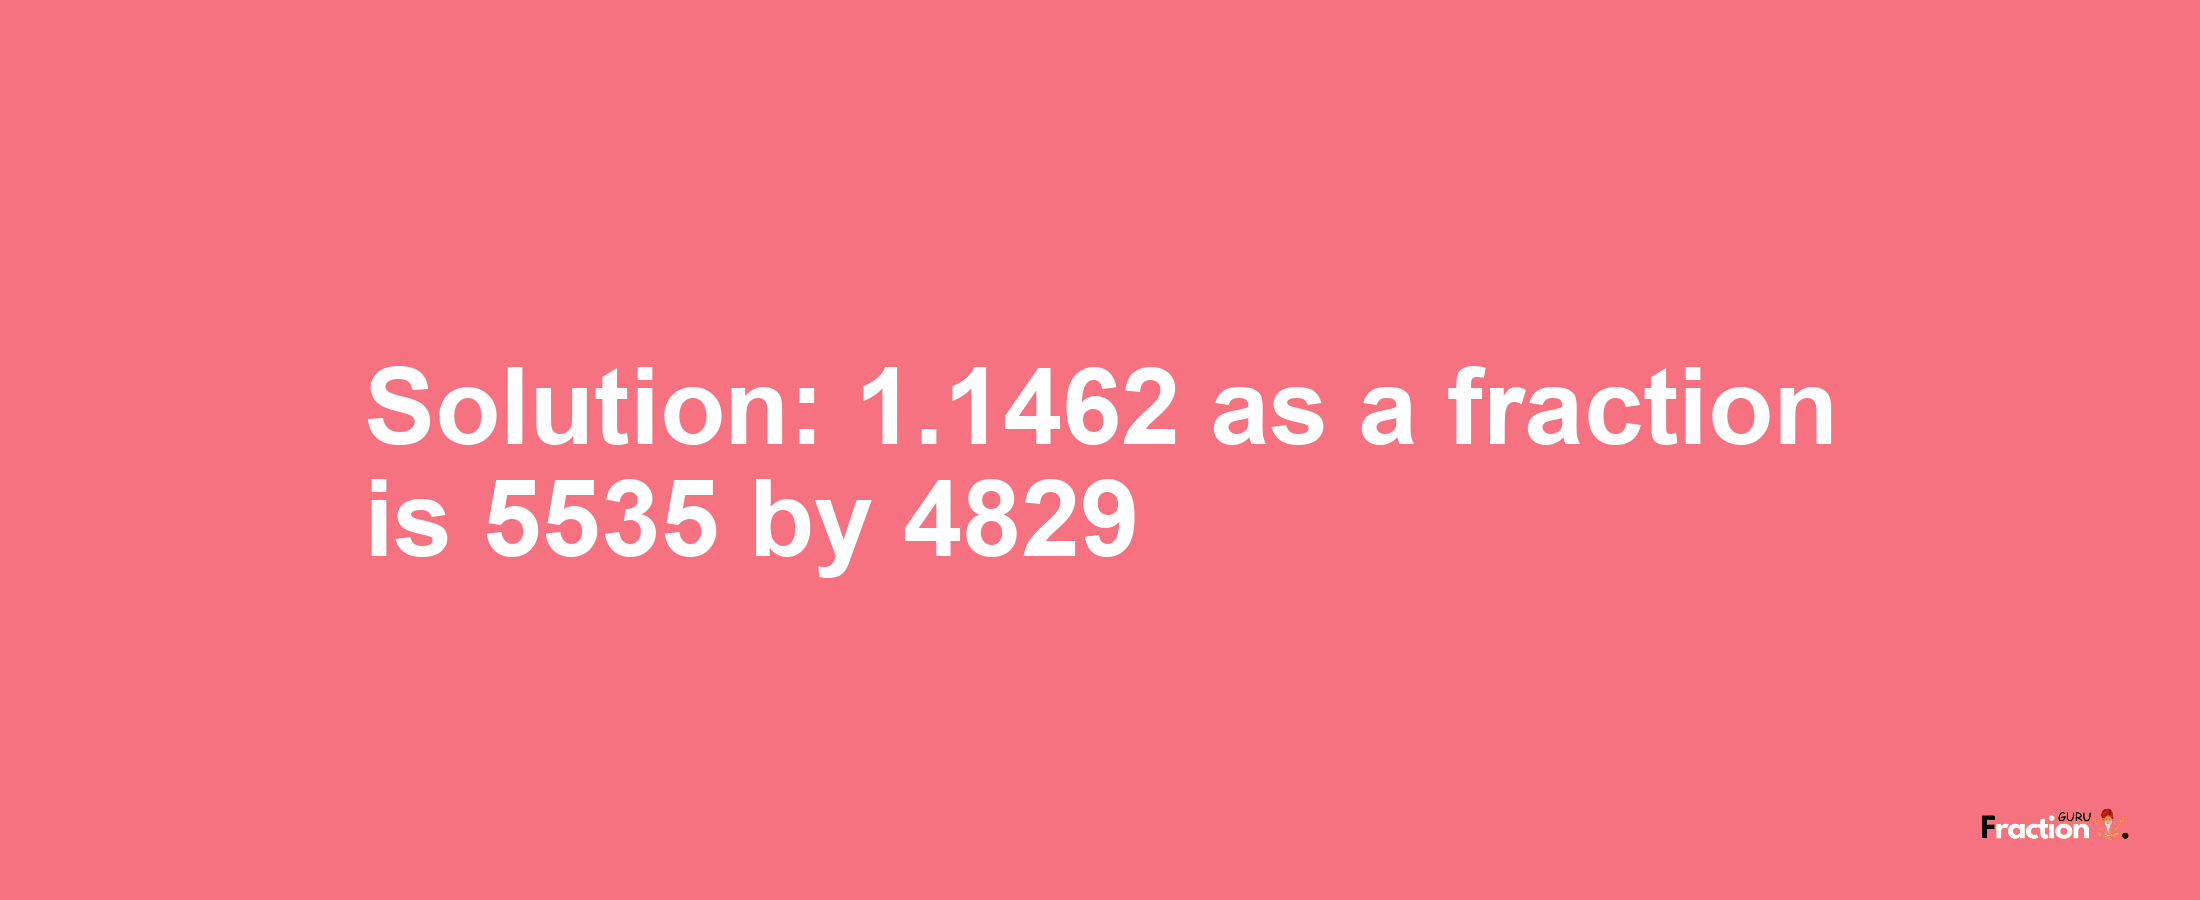 Solution:1.1462 as a fraction is 5535/4829